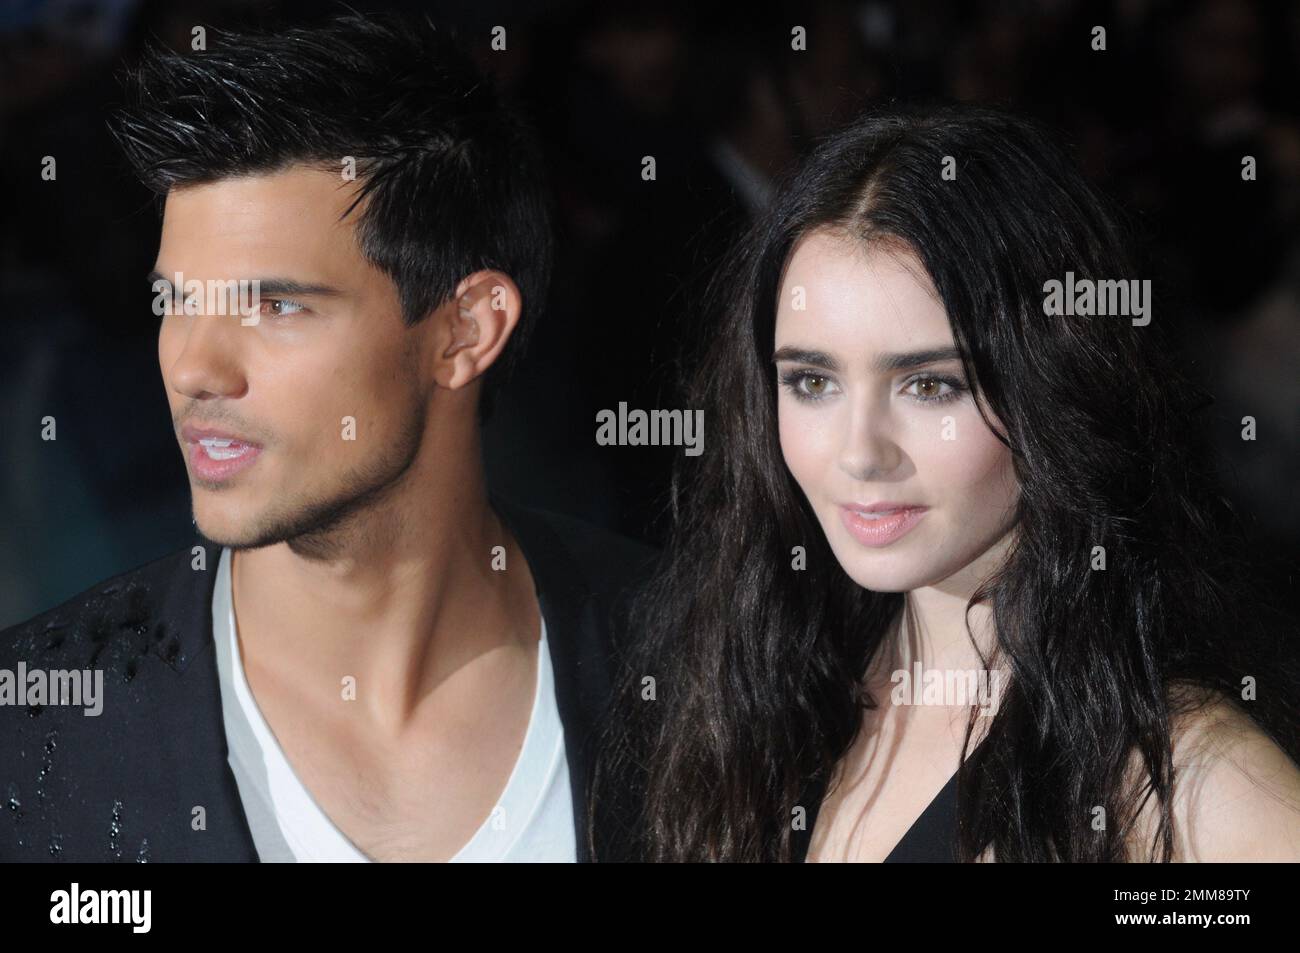 Taylor Lautner, Lily Collins, The European Premiere of Abduction, BFI IMAX, Southbank, Londra. 26.09.11 Foto Stock